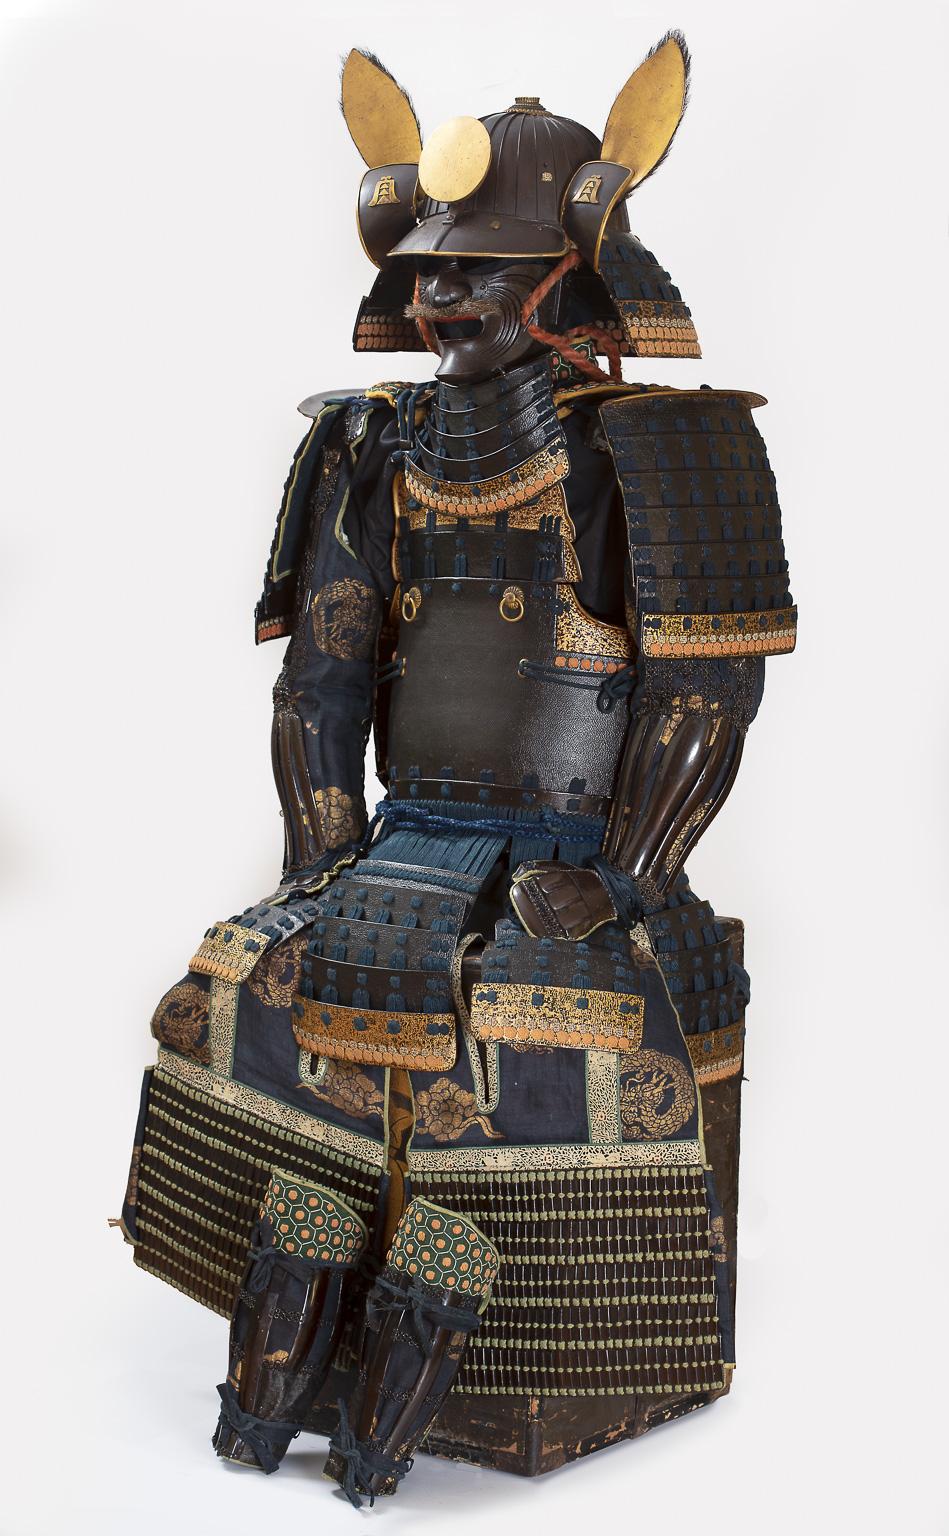 Tsutsumi-do tosei gusoku
Samurai armor with leather-covered cuirass

Kaga school

Mid Edo period, 18th-19th century

 

The armor features two characteristics that can be often found on suits made in the region of Kaga: the leather surface